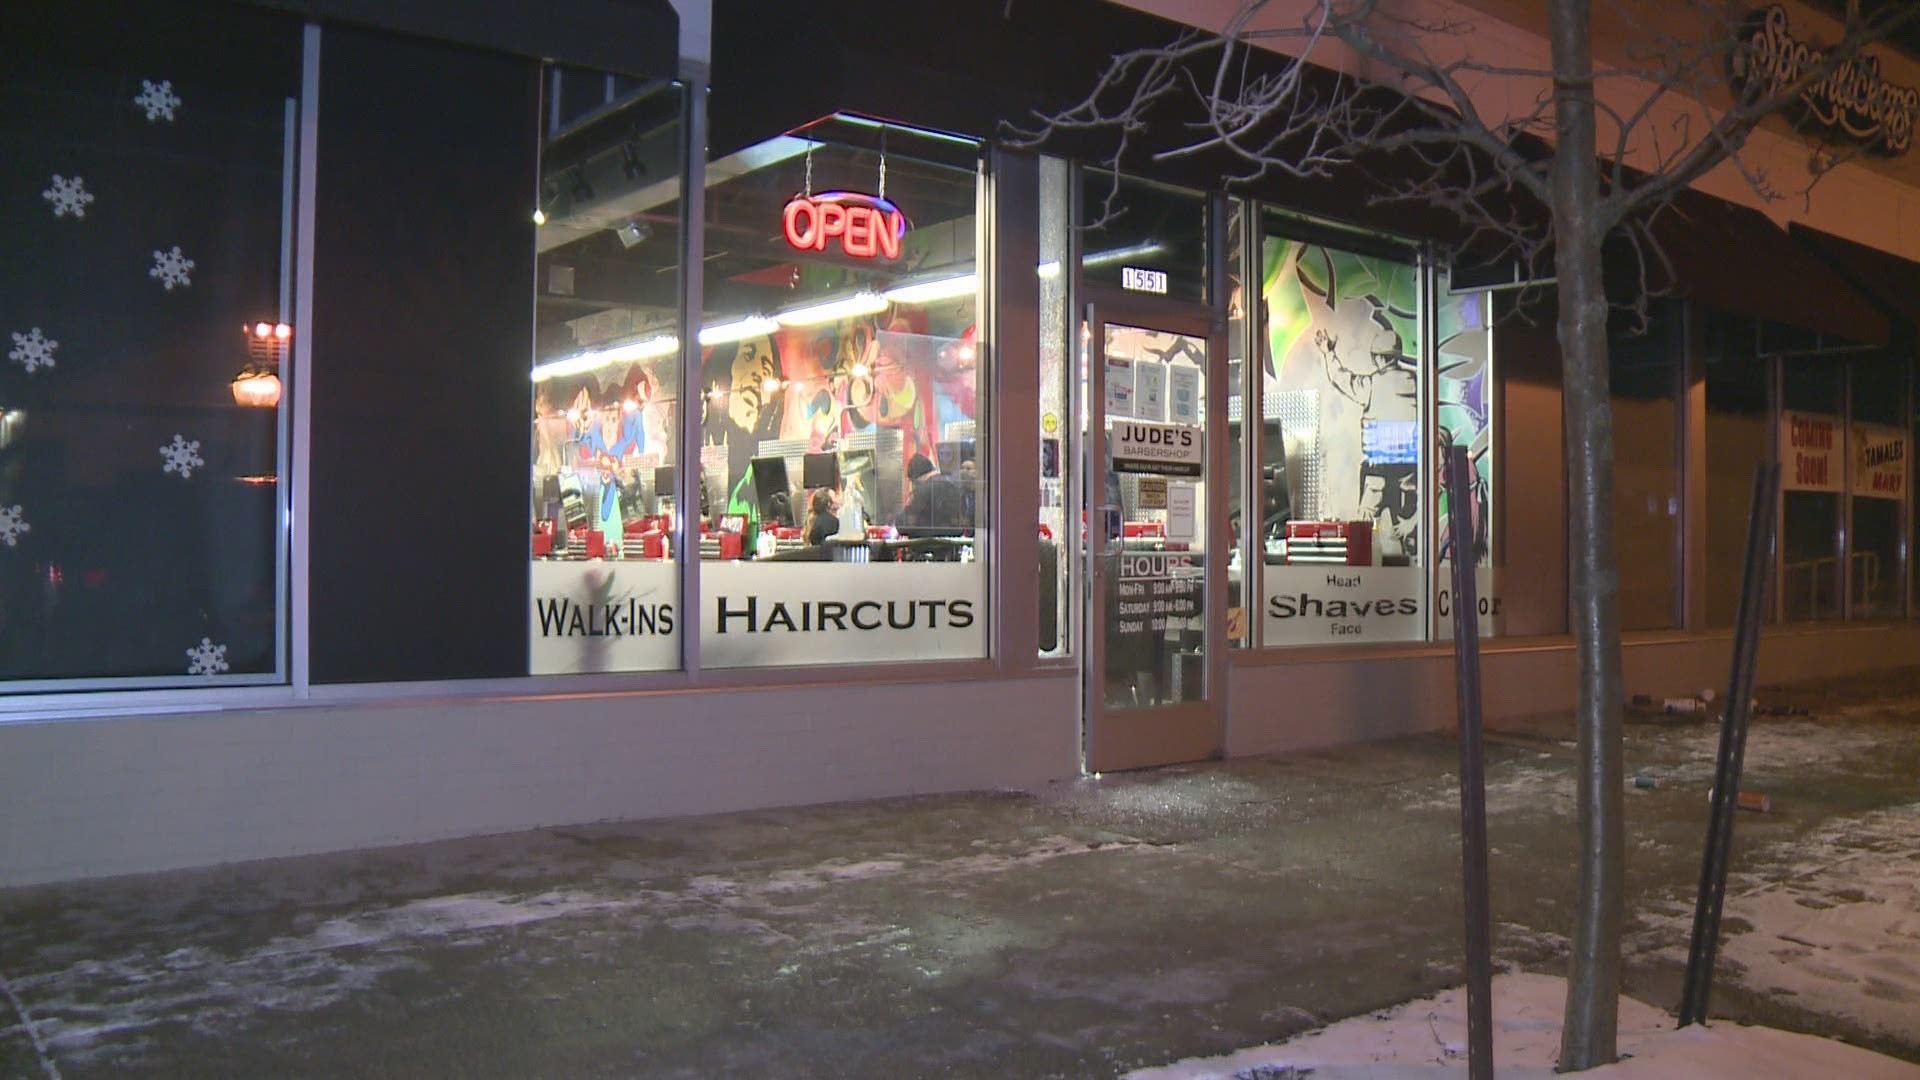 Authorities in Grand Rapids are investigating an apparent break-in at a barbershop.